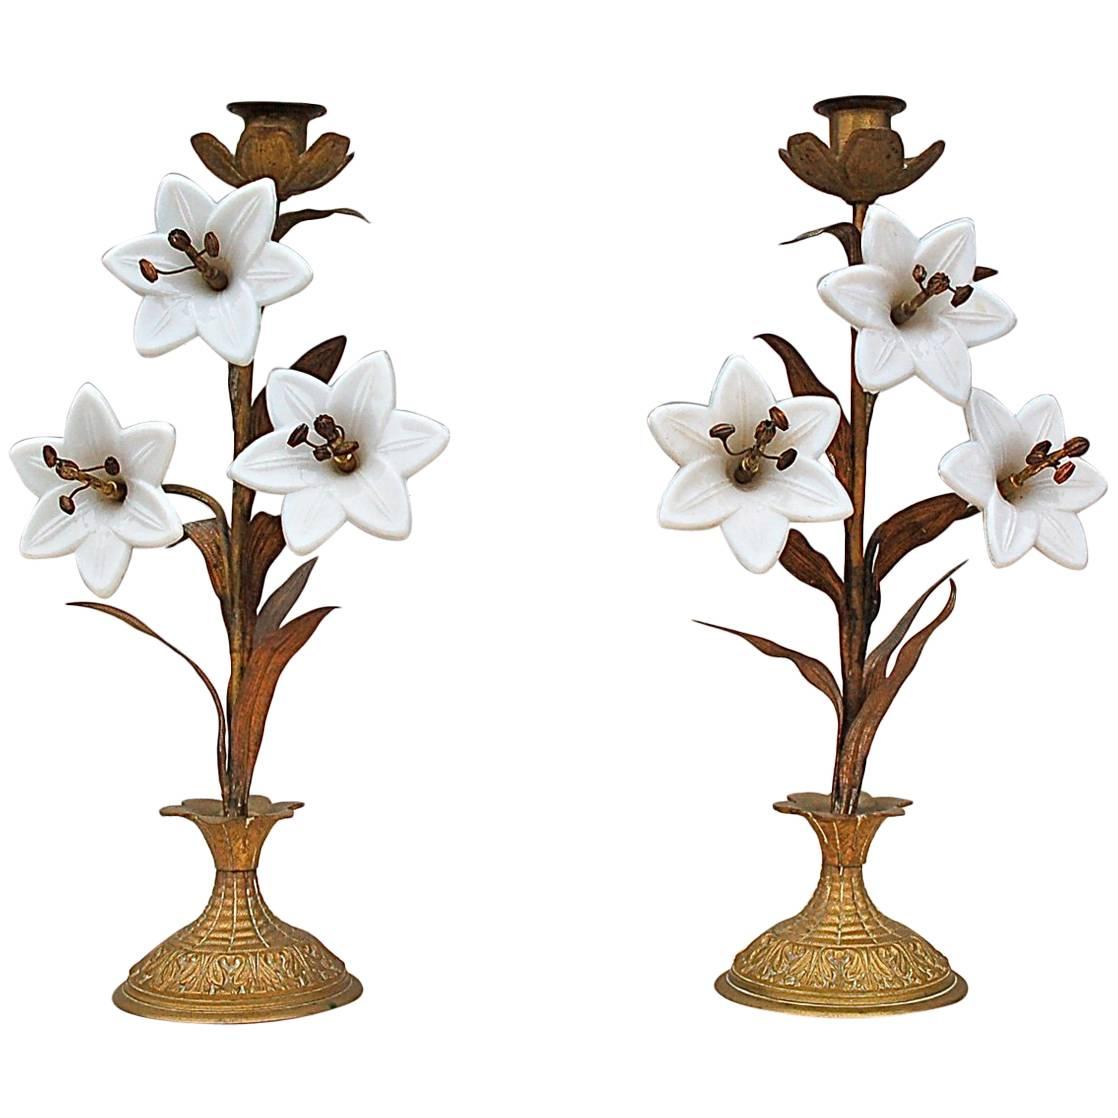 Pair of Antique White Lilly Candlesticks, 19th Century, France